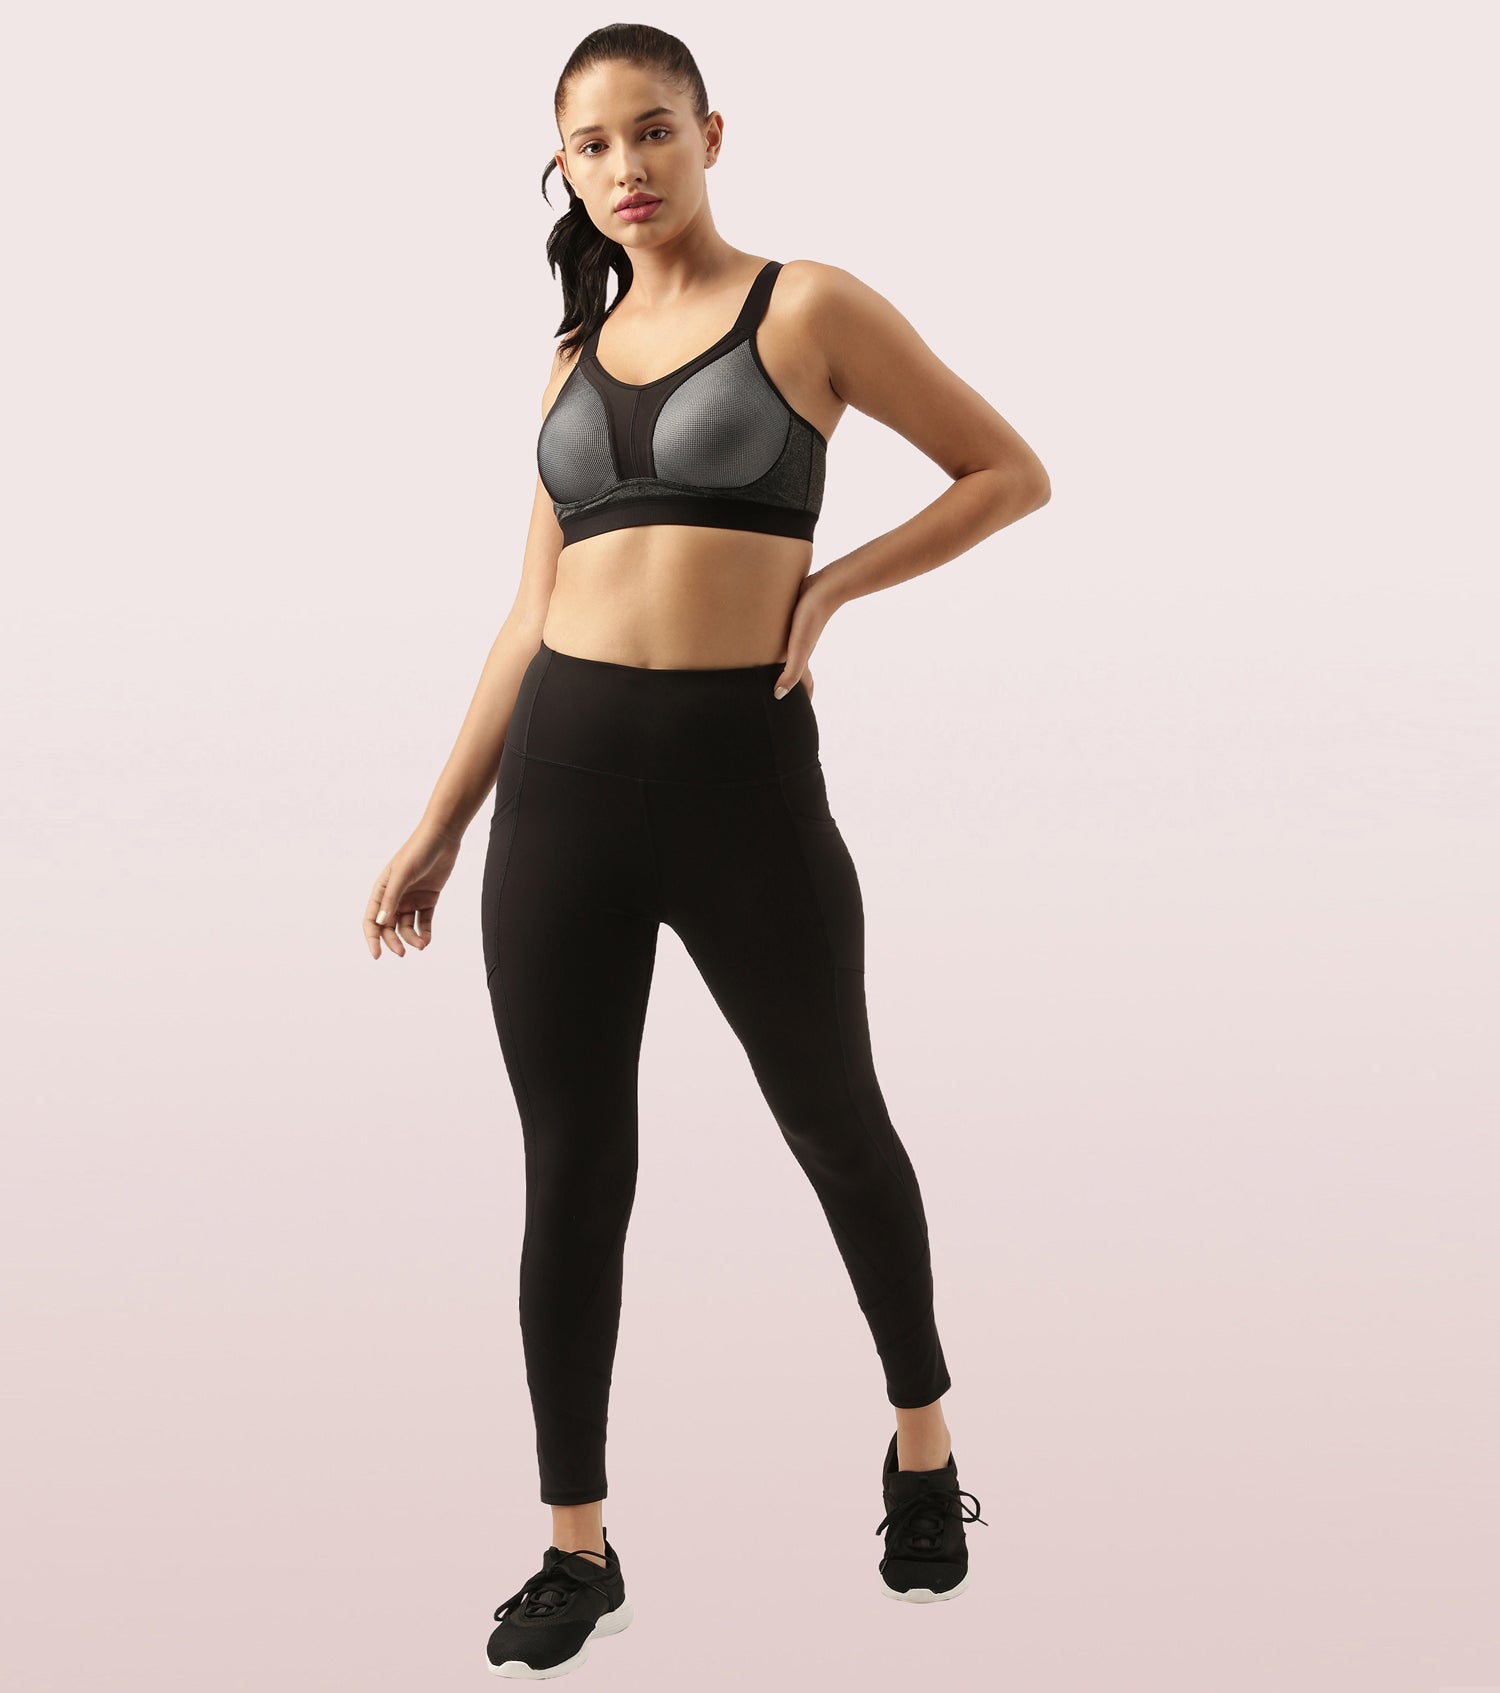 Amazon.com: OLCHEE Women's Workout Sets 2 Piece - Seamless Yoga Leggings  and Cross-Strap Sports Bra Gym Outfits Activewear Matching Set - Black  Small : Clothing, Shoes & Jewelry